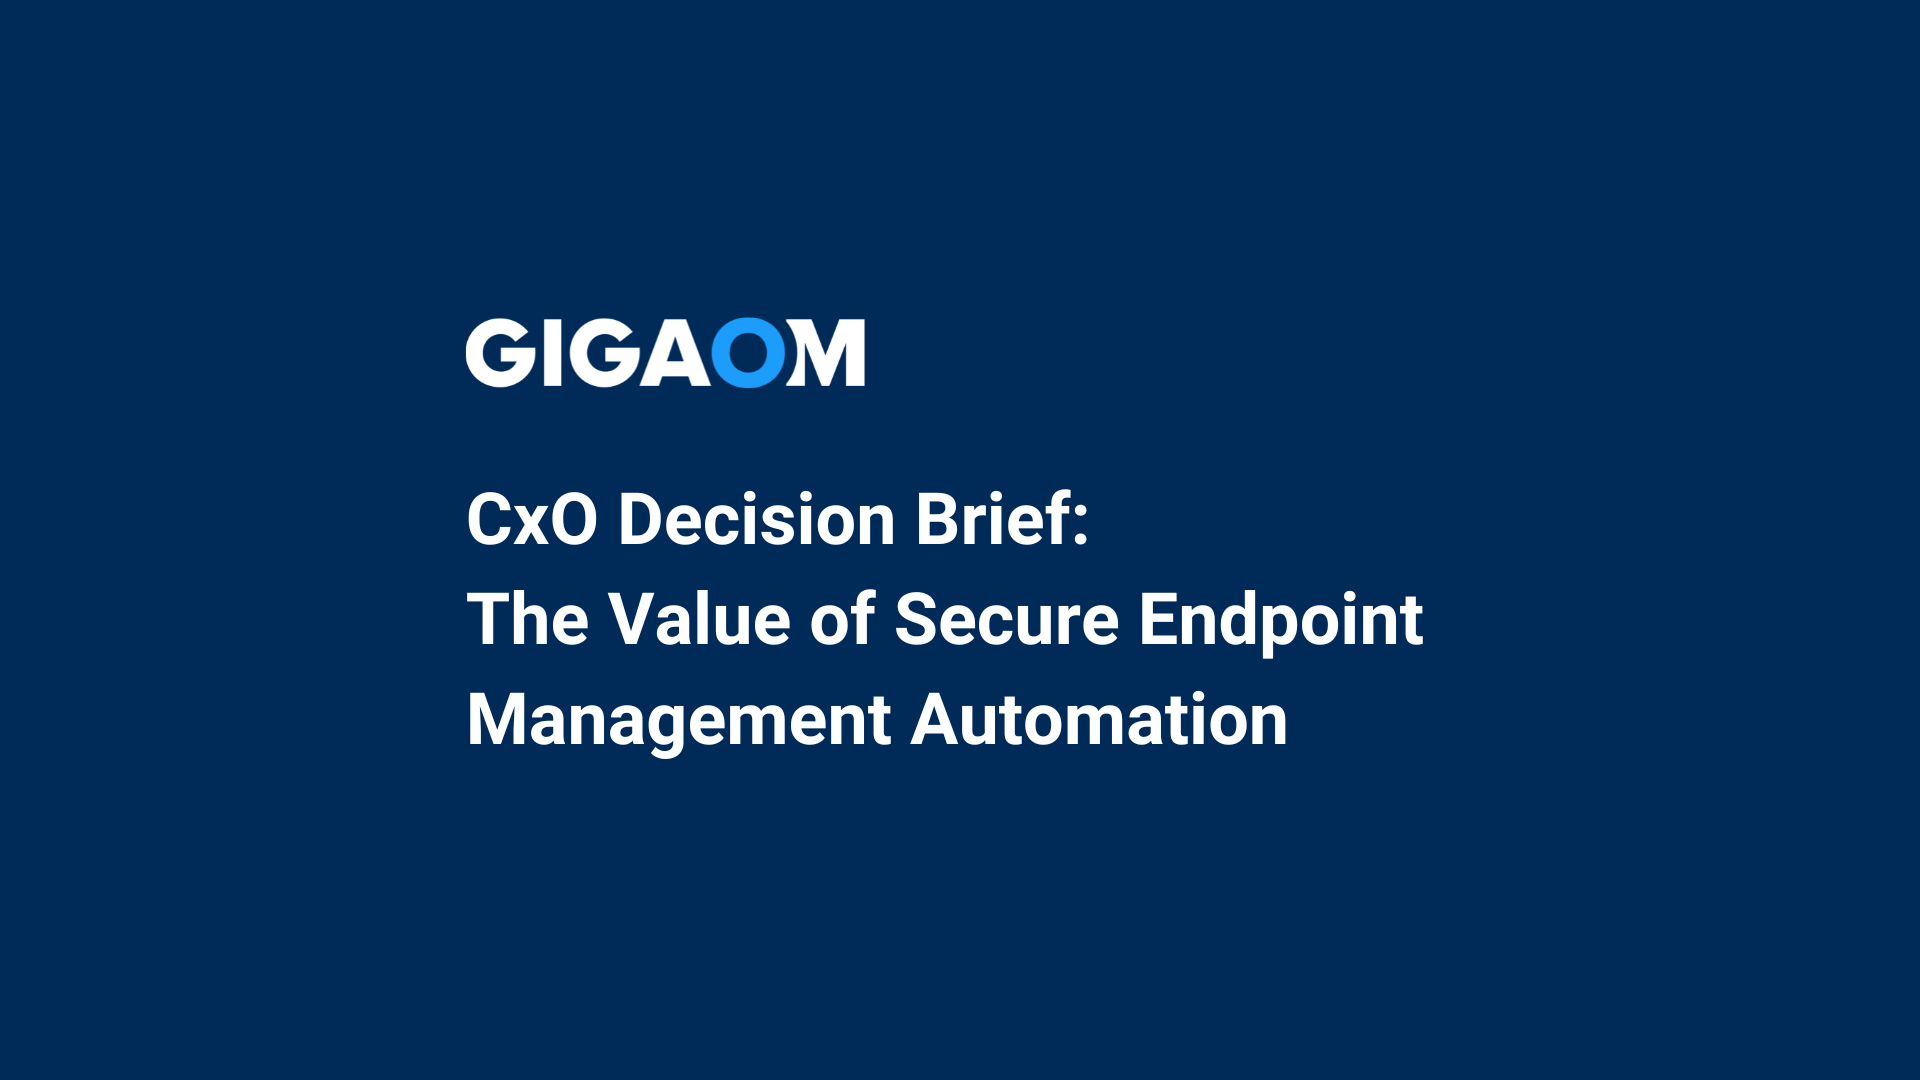 CxO Decision Brief The Value of Secure Endpoint Management Automation-7